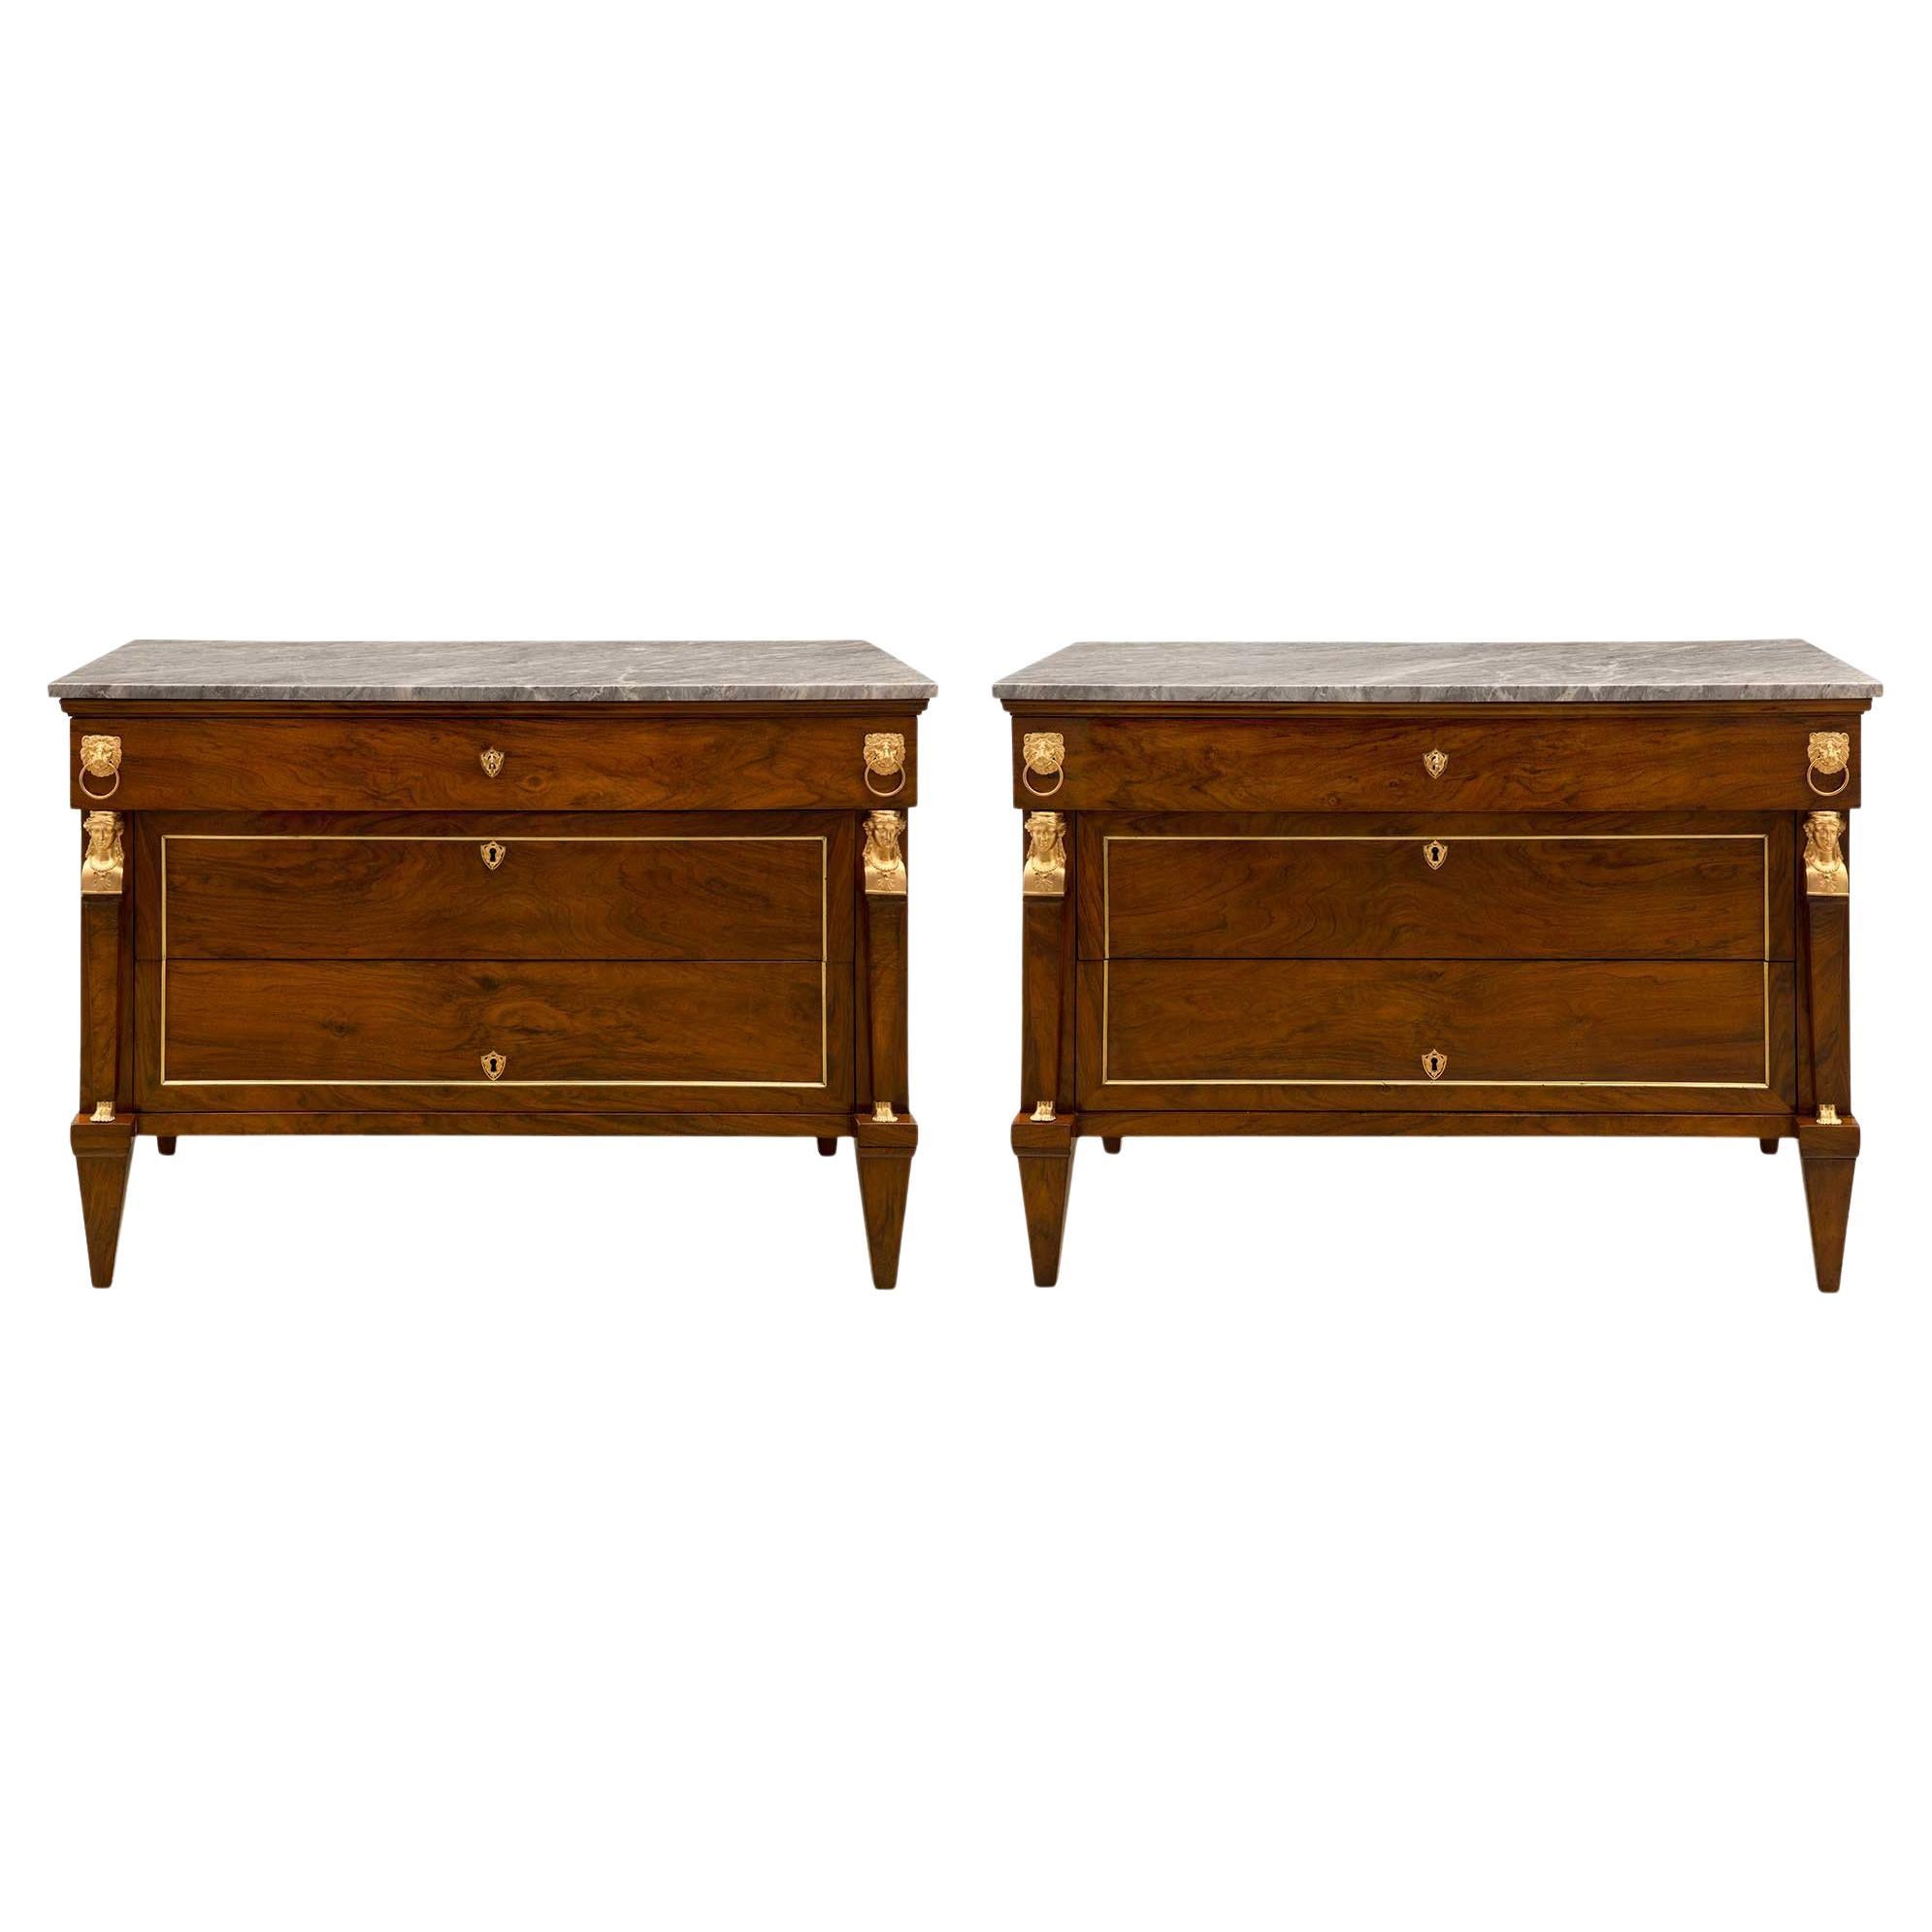 French Early 19th Century Empire St. Walnut, Ormolu and Marble Chests For Sale